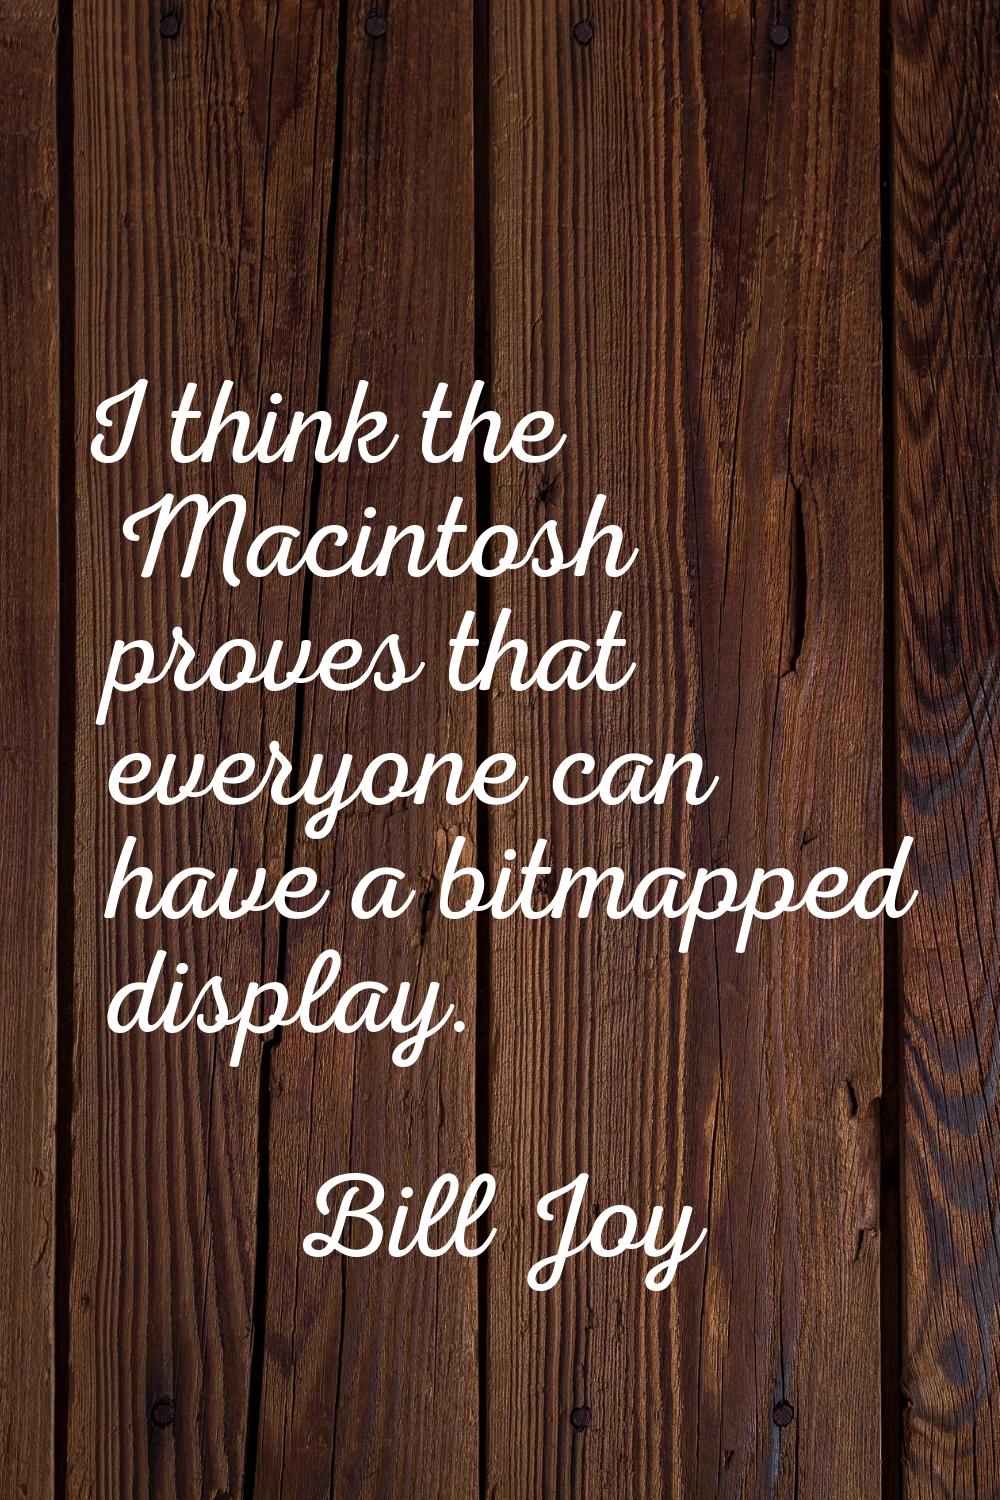 I think the Macintosh proves that everyone can have a bitmapped display.